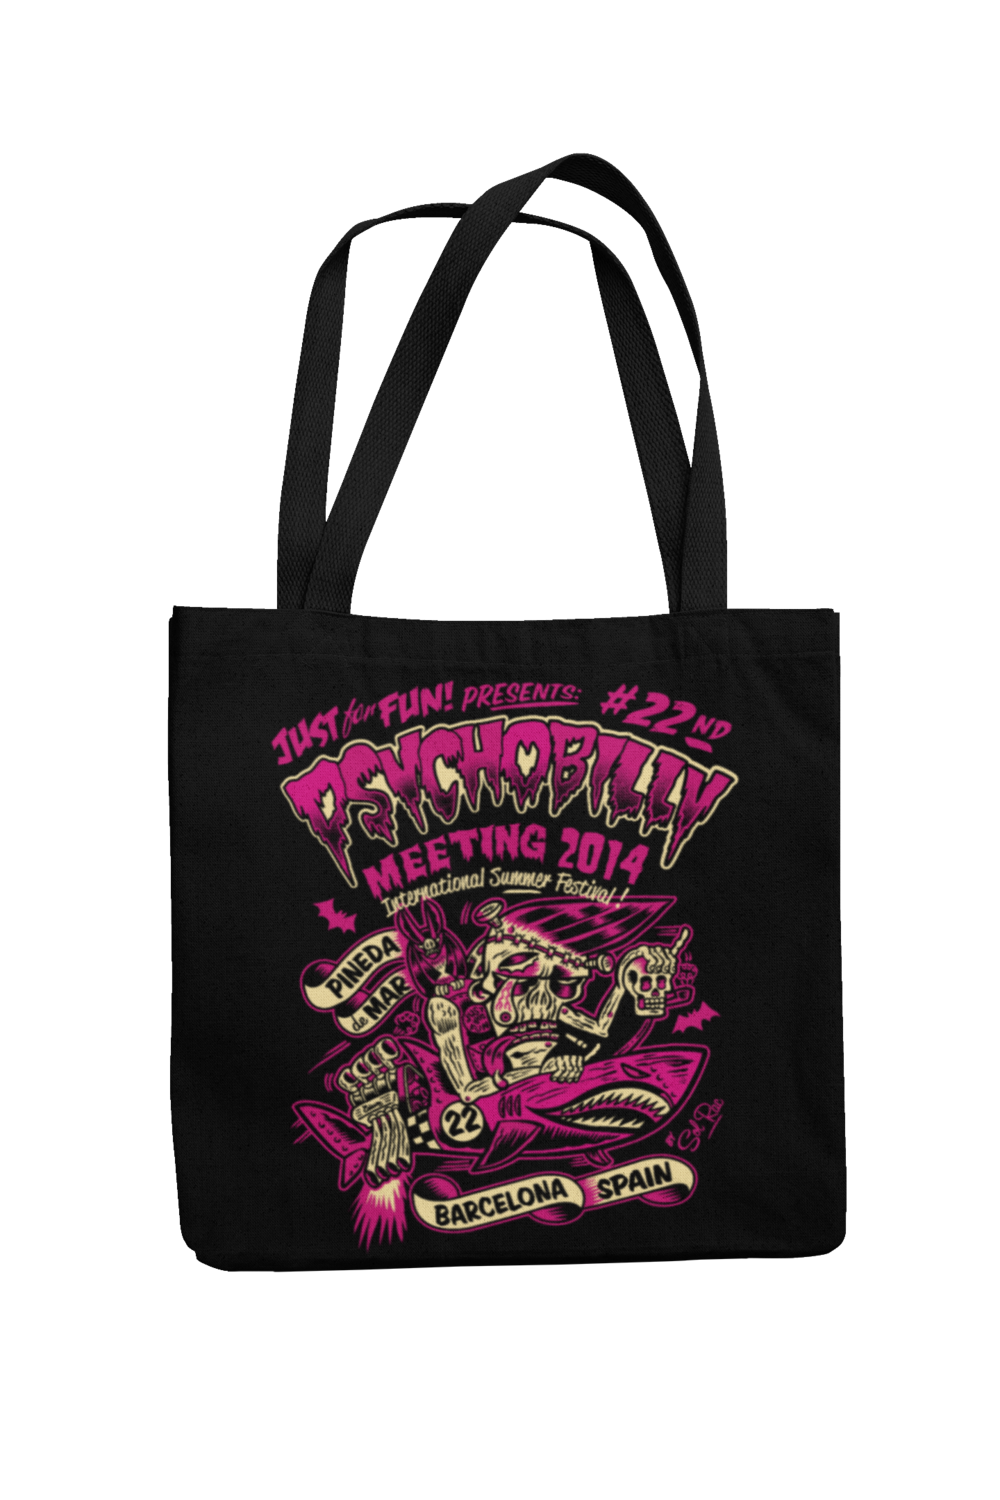 Cotton Bag Psychobilly meeting design by Solrac 2014